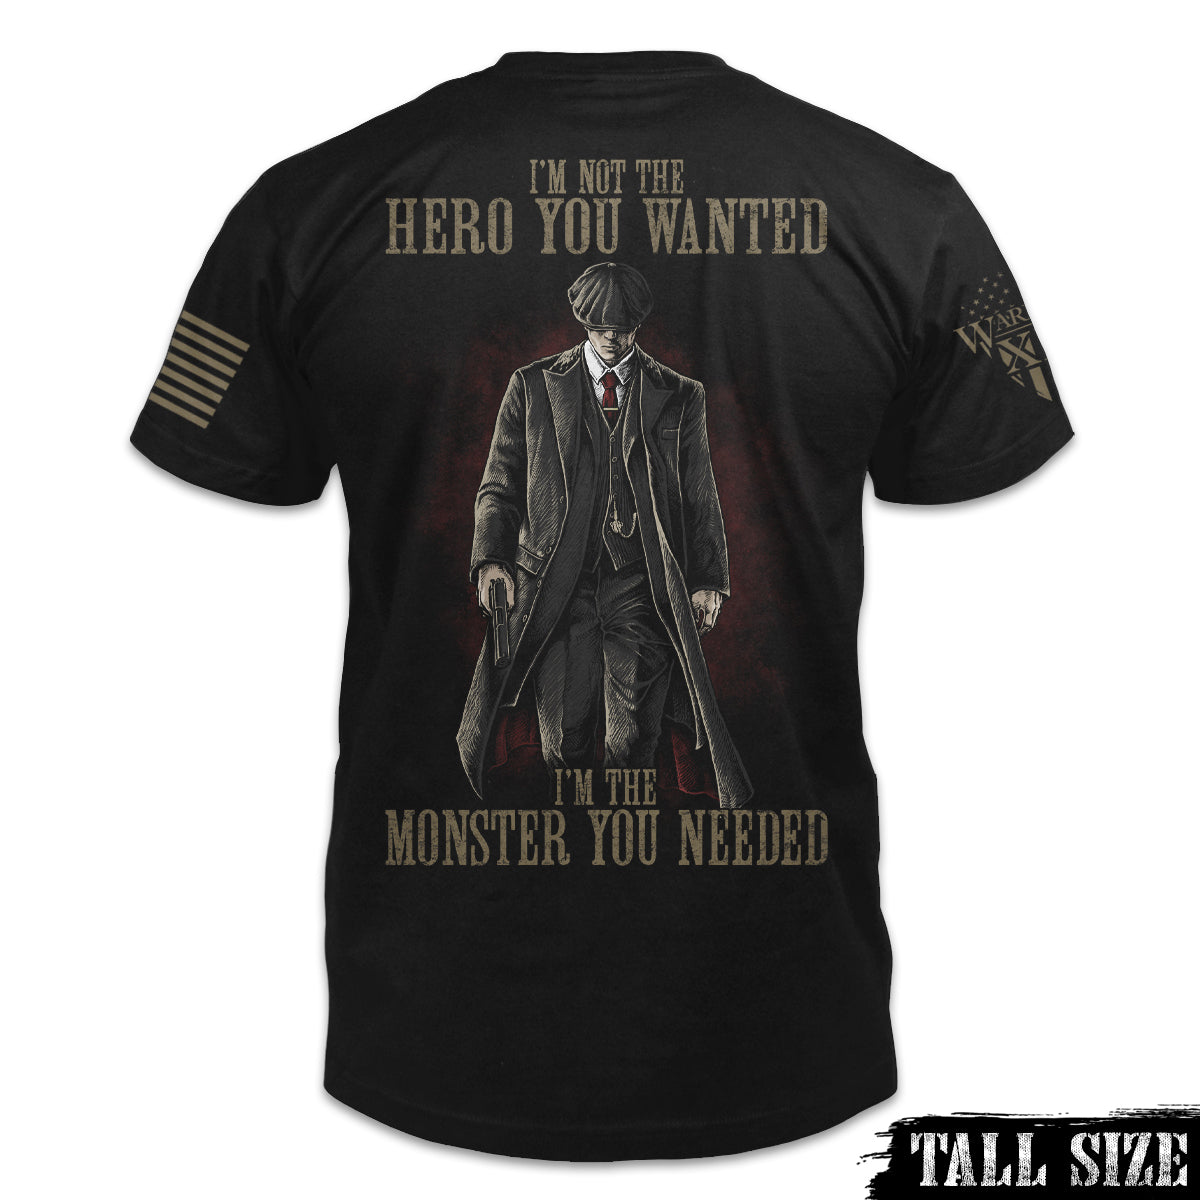 A black tall size shirt with the words "I'm not the hero you wanted, I'm the monster you needed" with a Tommy Shelby outline printed on the back of the shirt.